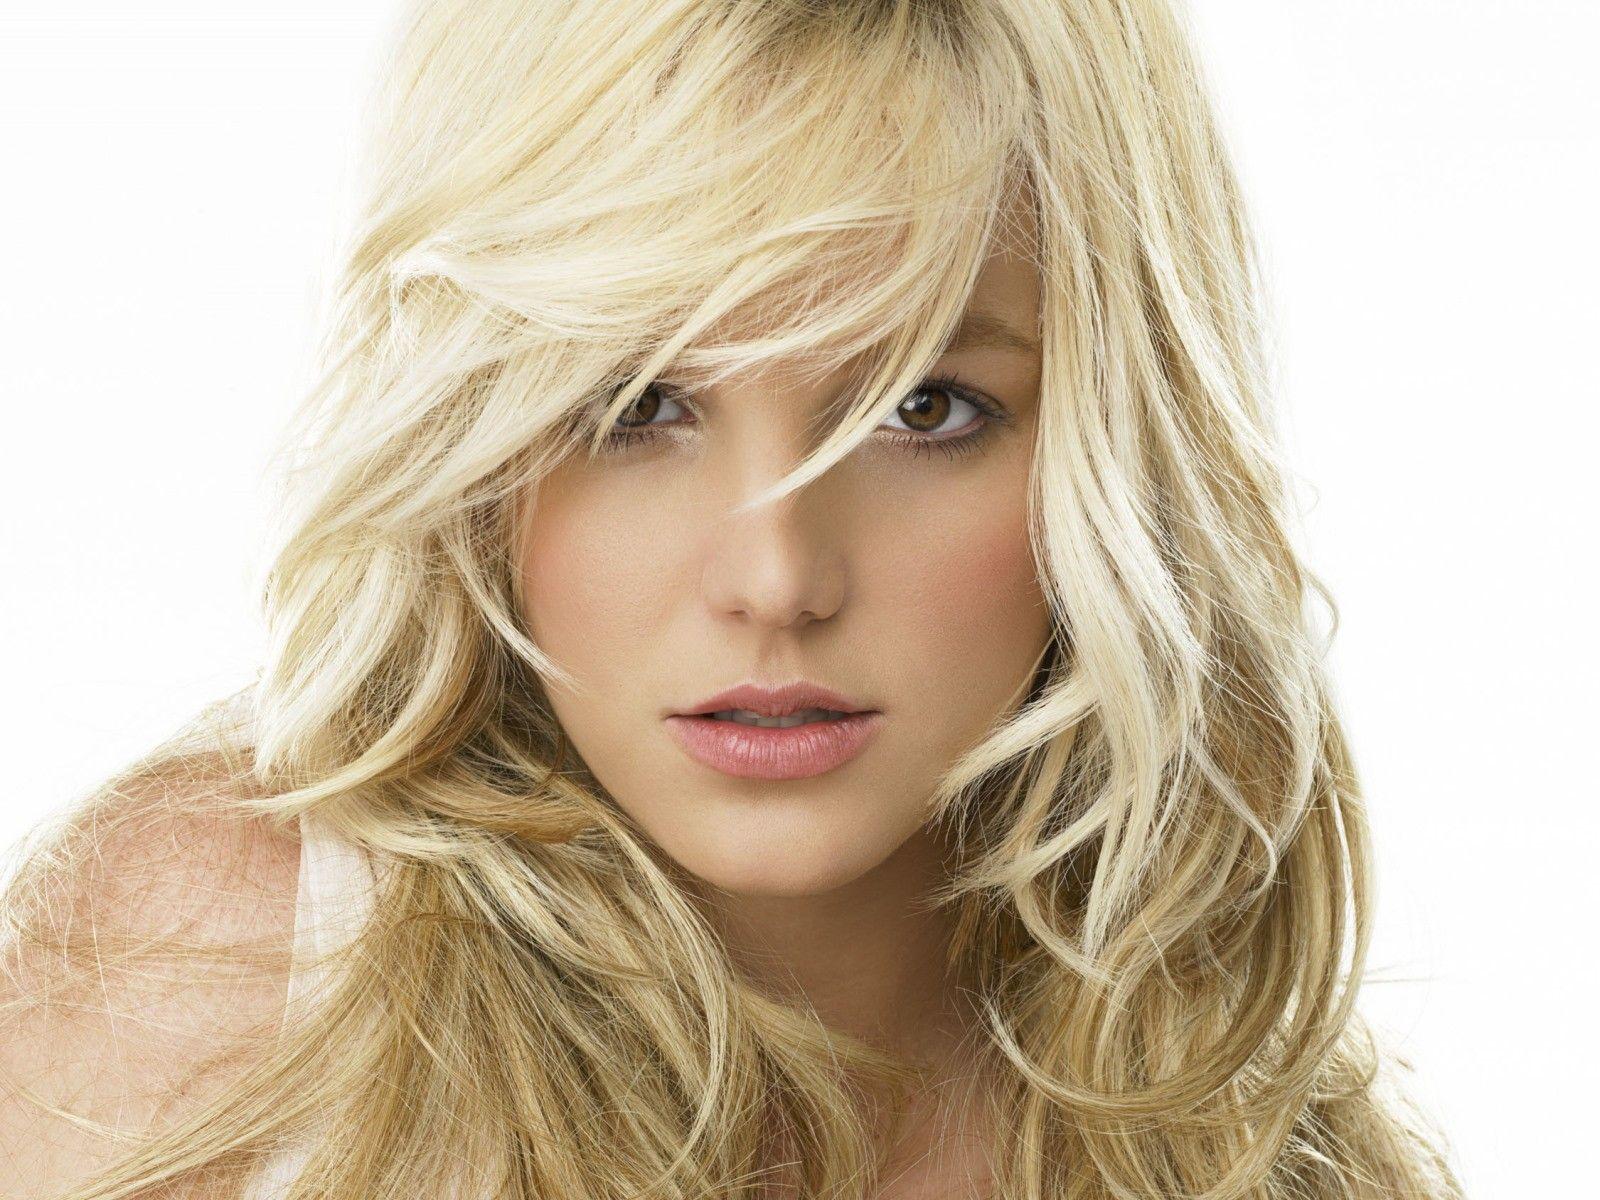 items of Britney Spears Wallpaper. Explore Britney Spears